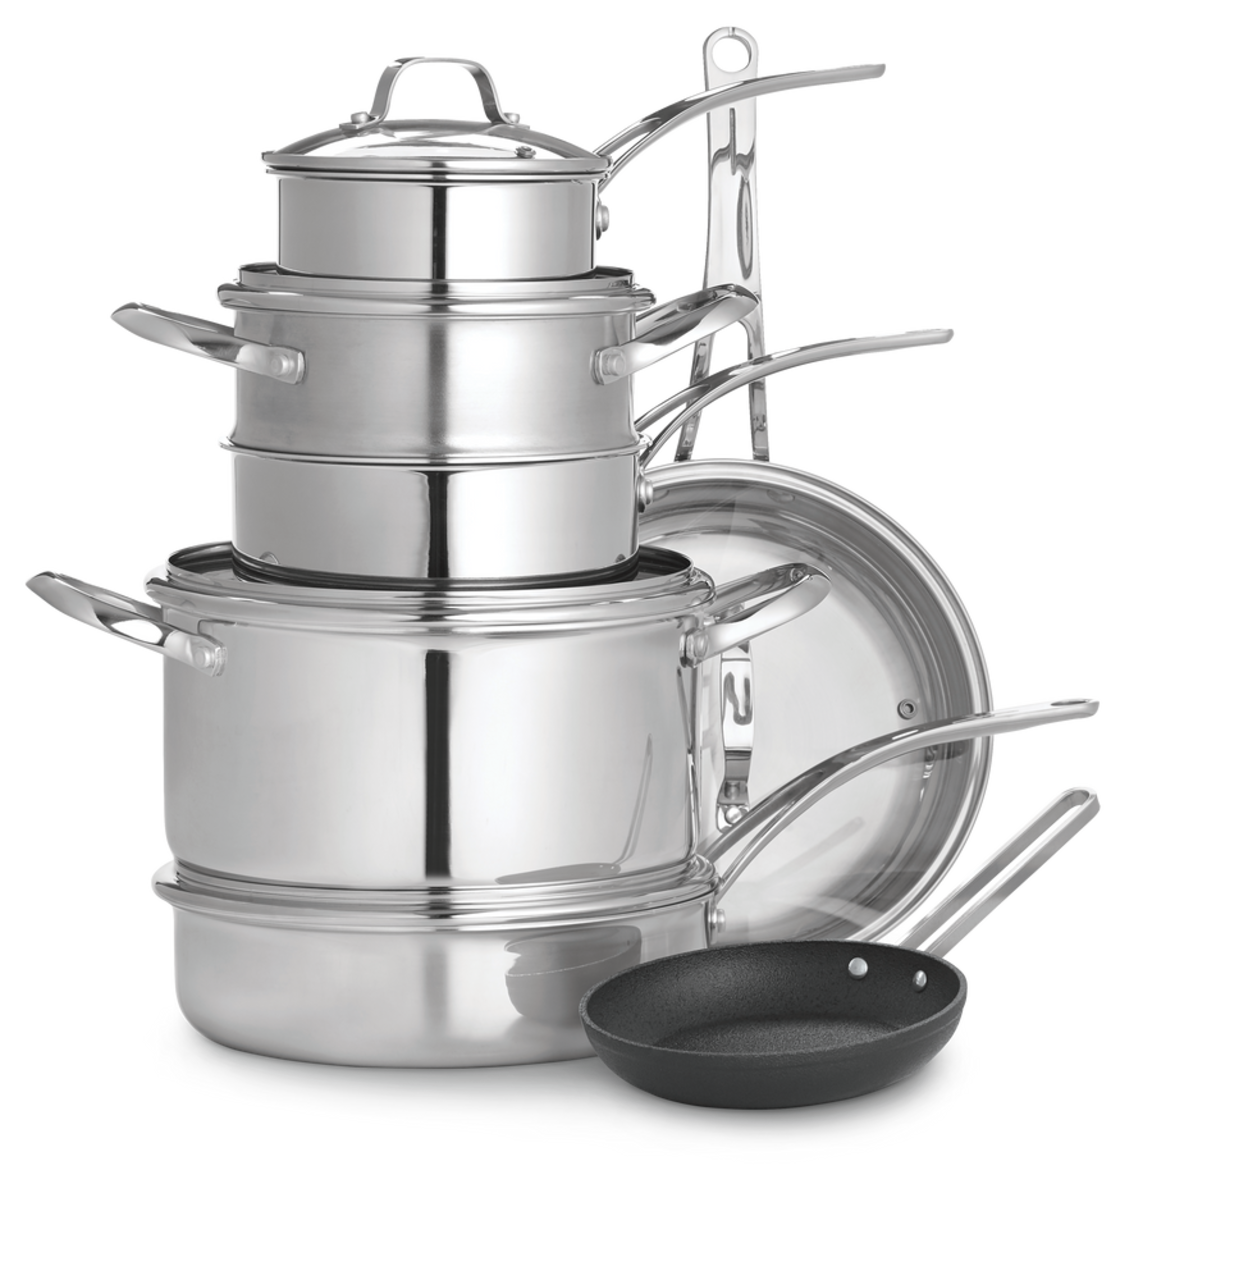 https://media-www.canadiantire.ca/product/living/kitchen/cookware/1429420/12-pc-heritage-clad-cookset-1c9cbcaa-f361-41b4-be7b-9a2b392a116c.png?imdensity=1&imwidth=640&impolicy=mZoom